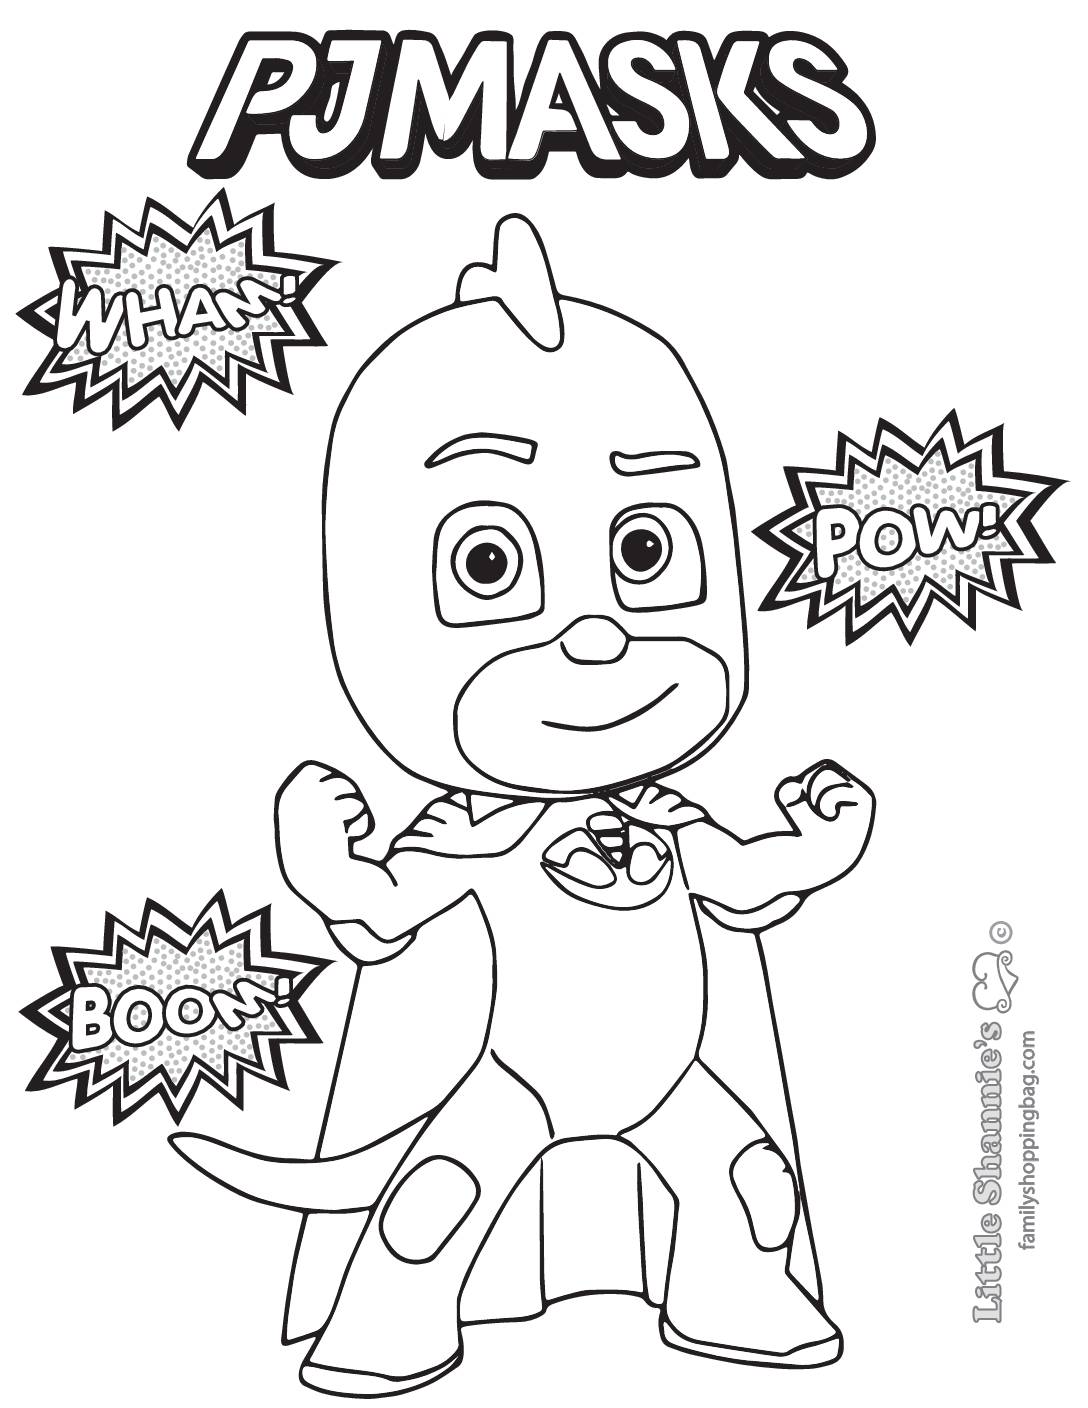 Pj Masks Characters Coloring Pages 2 Free Coloring Sheets 2021 | Images ...